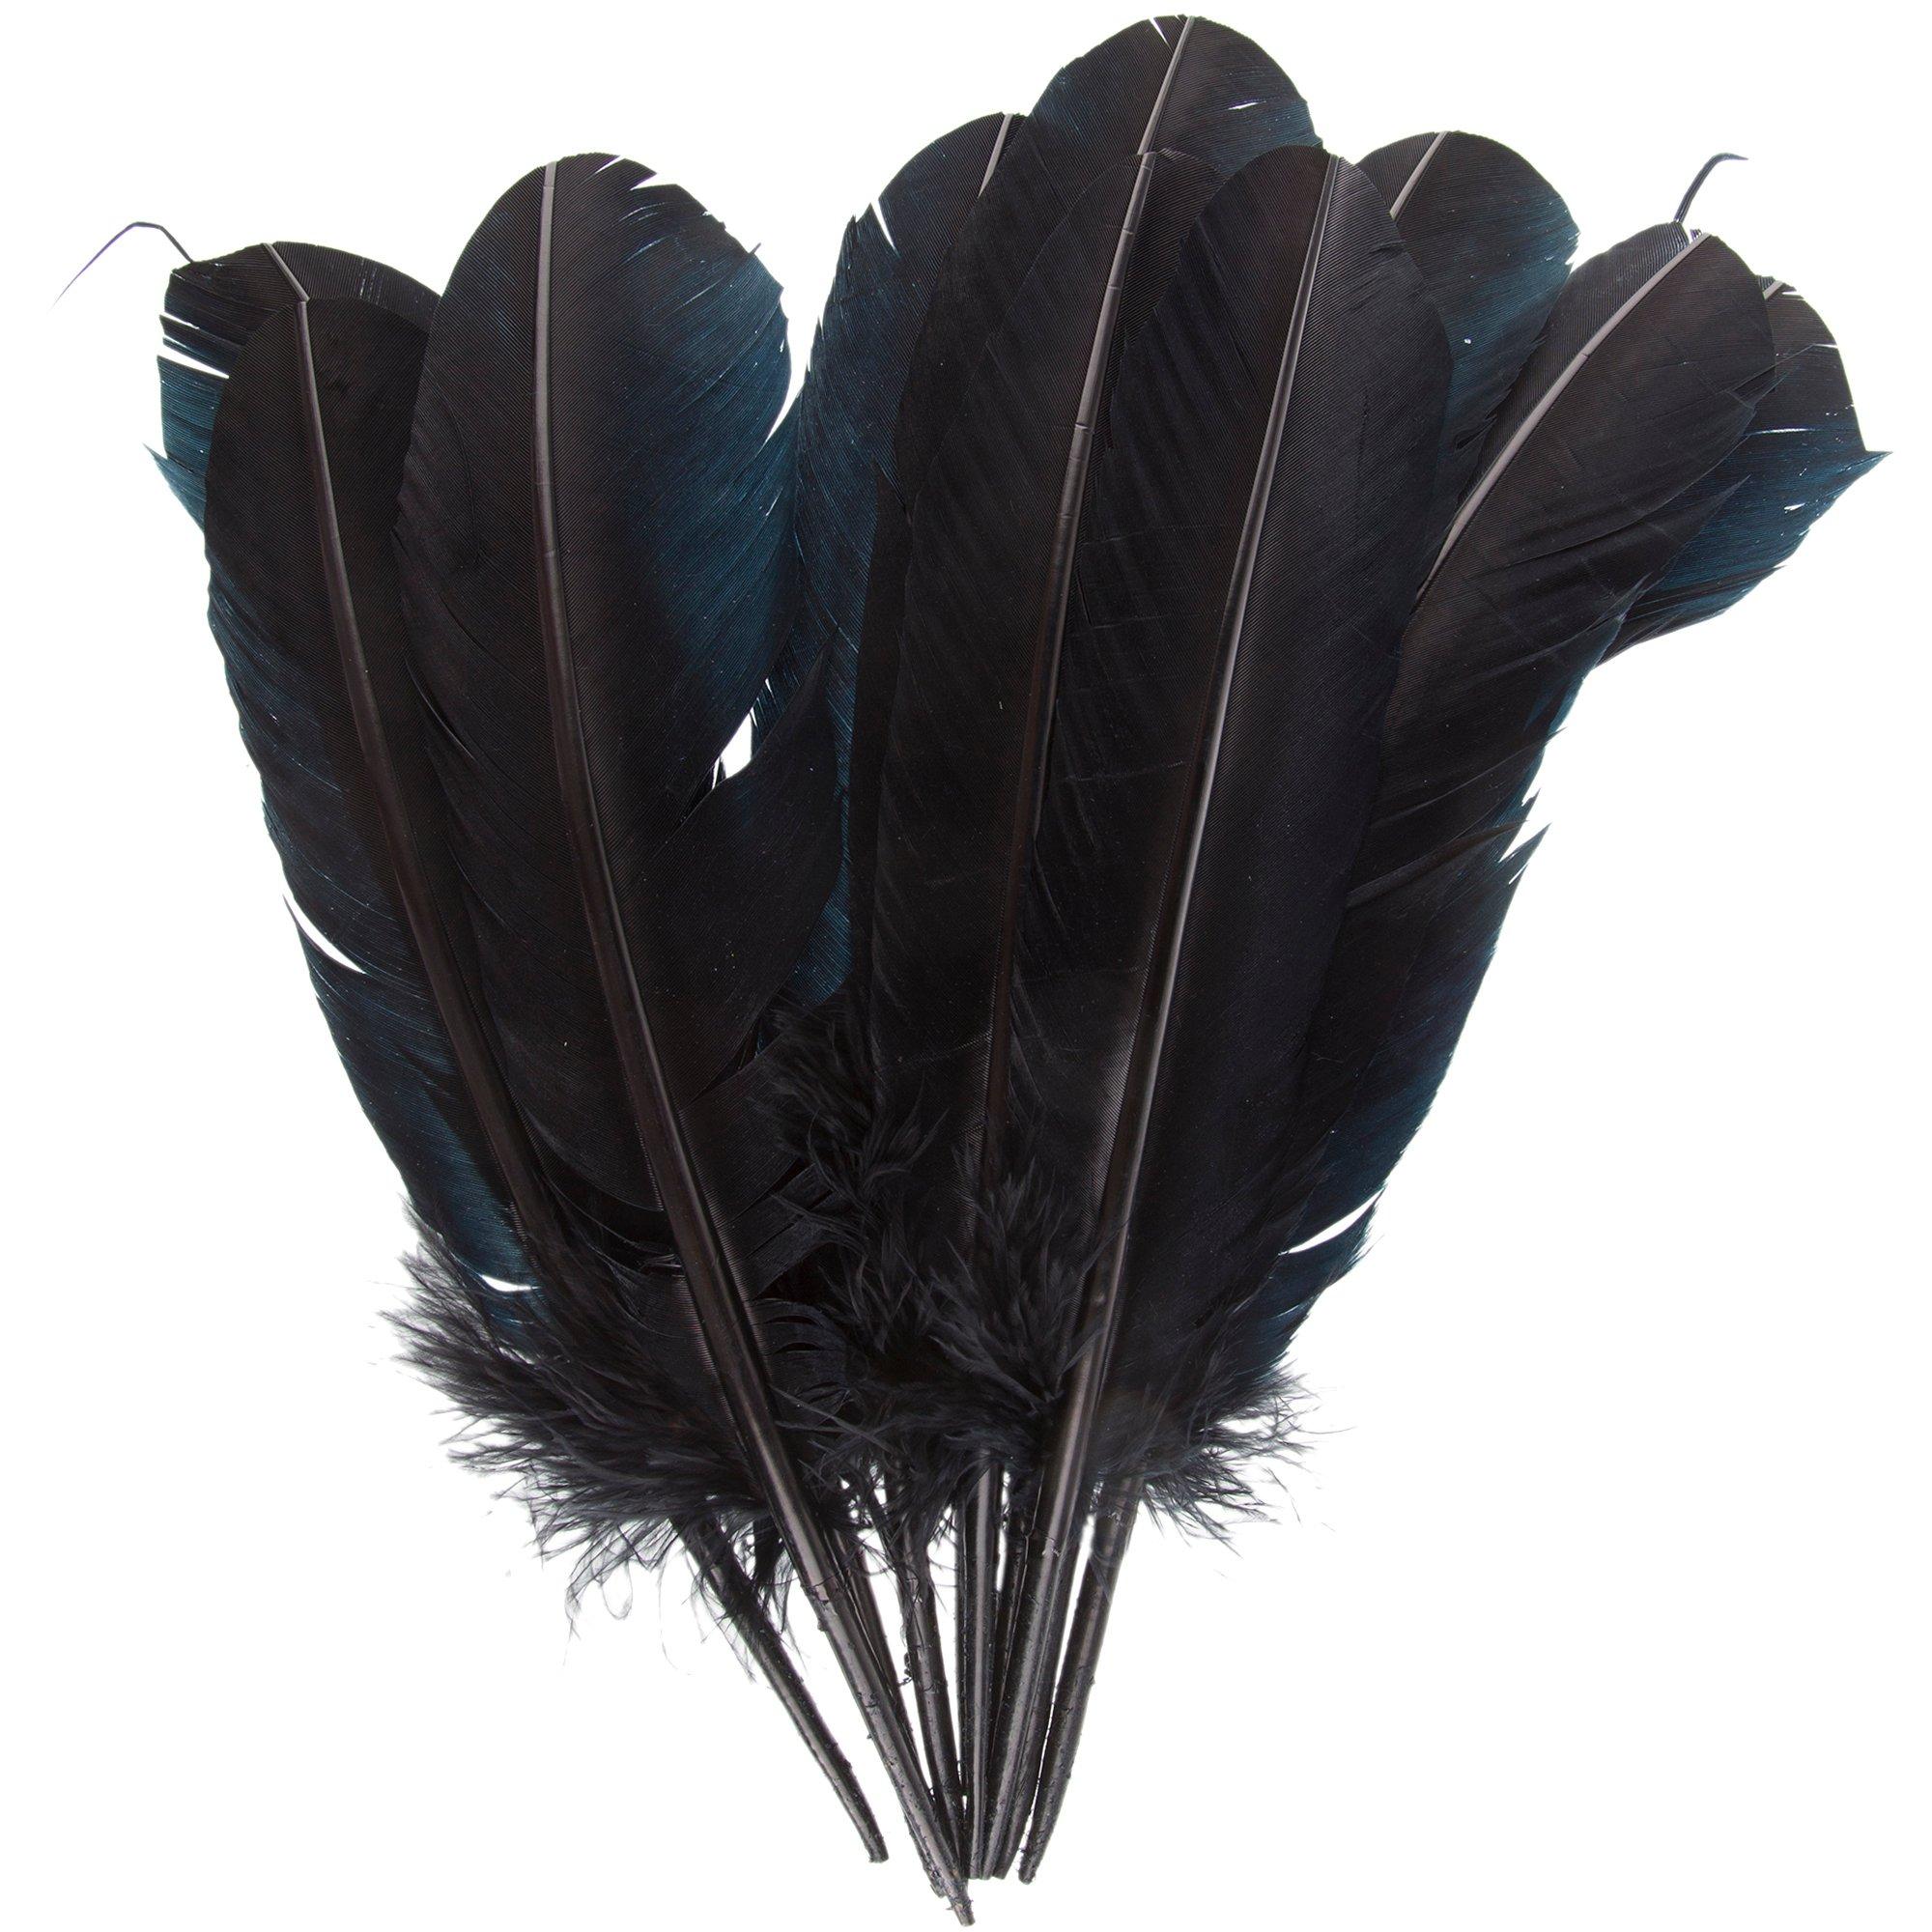 Natural Mix Goose Feathers, Hobby Lobby